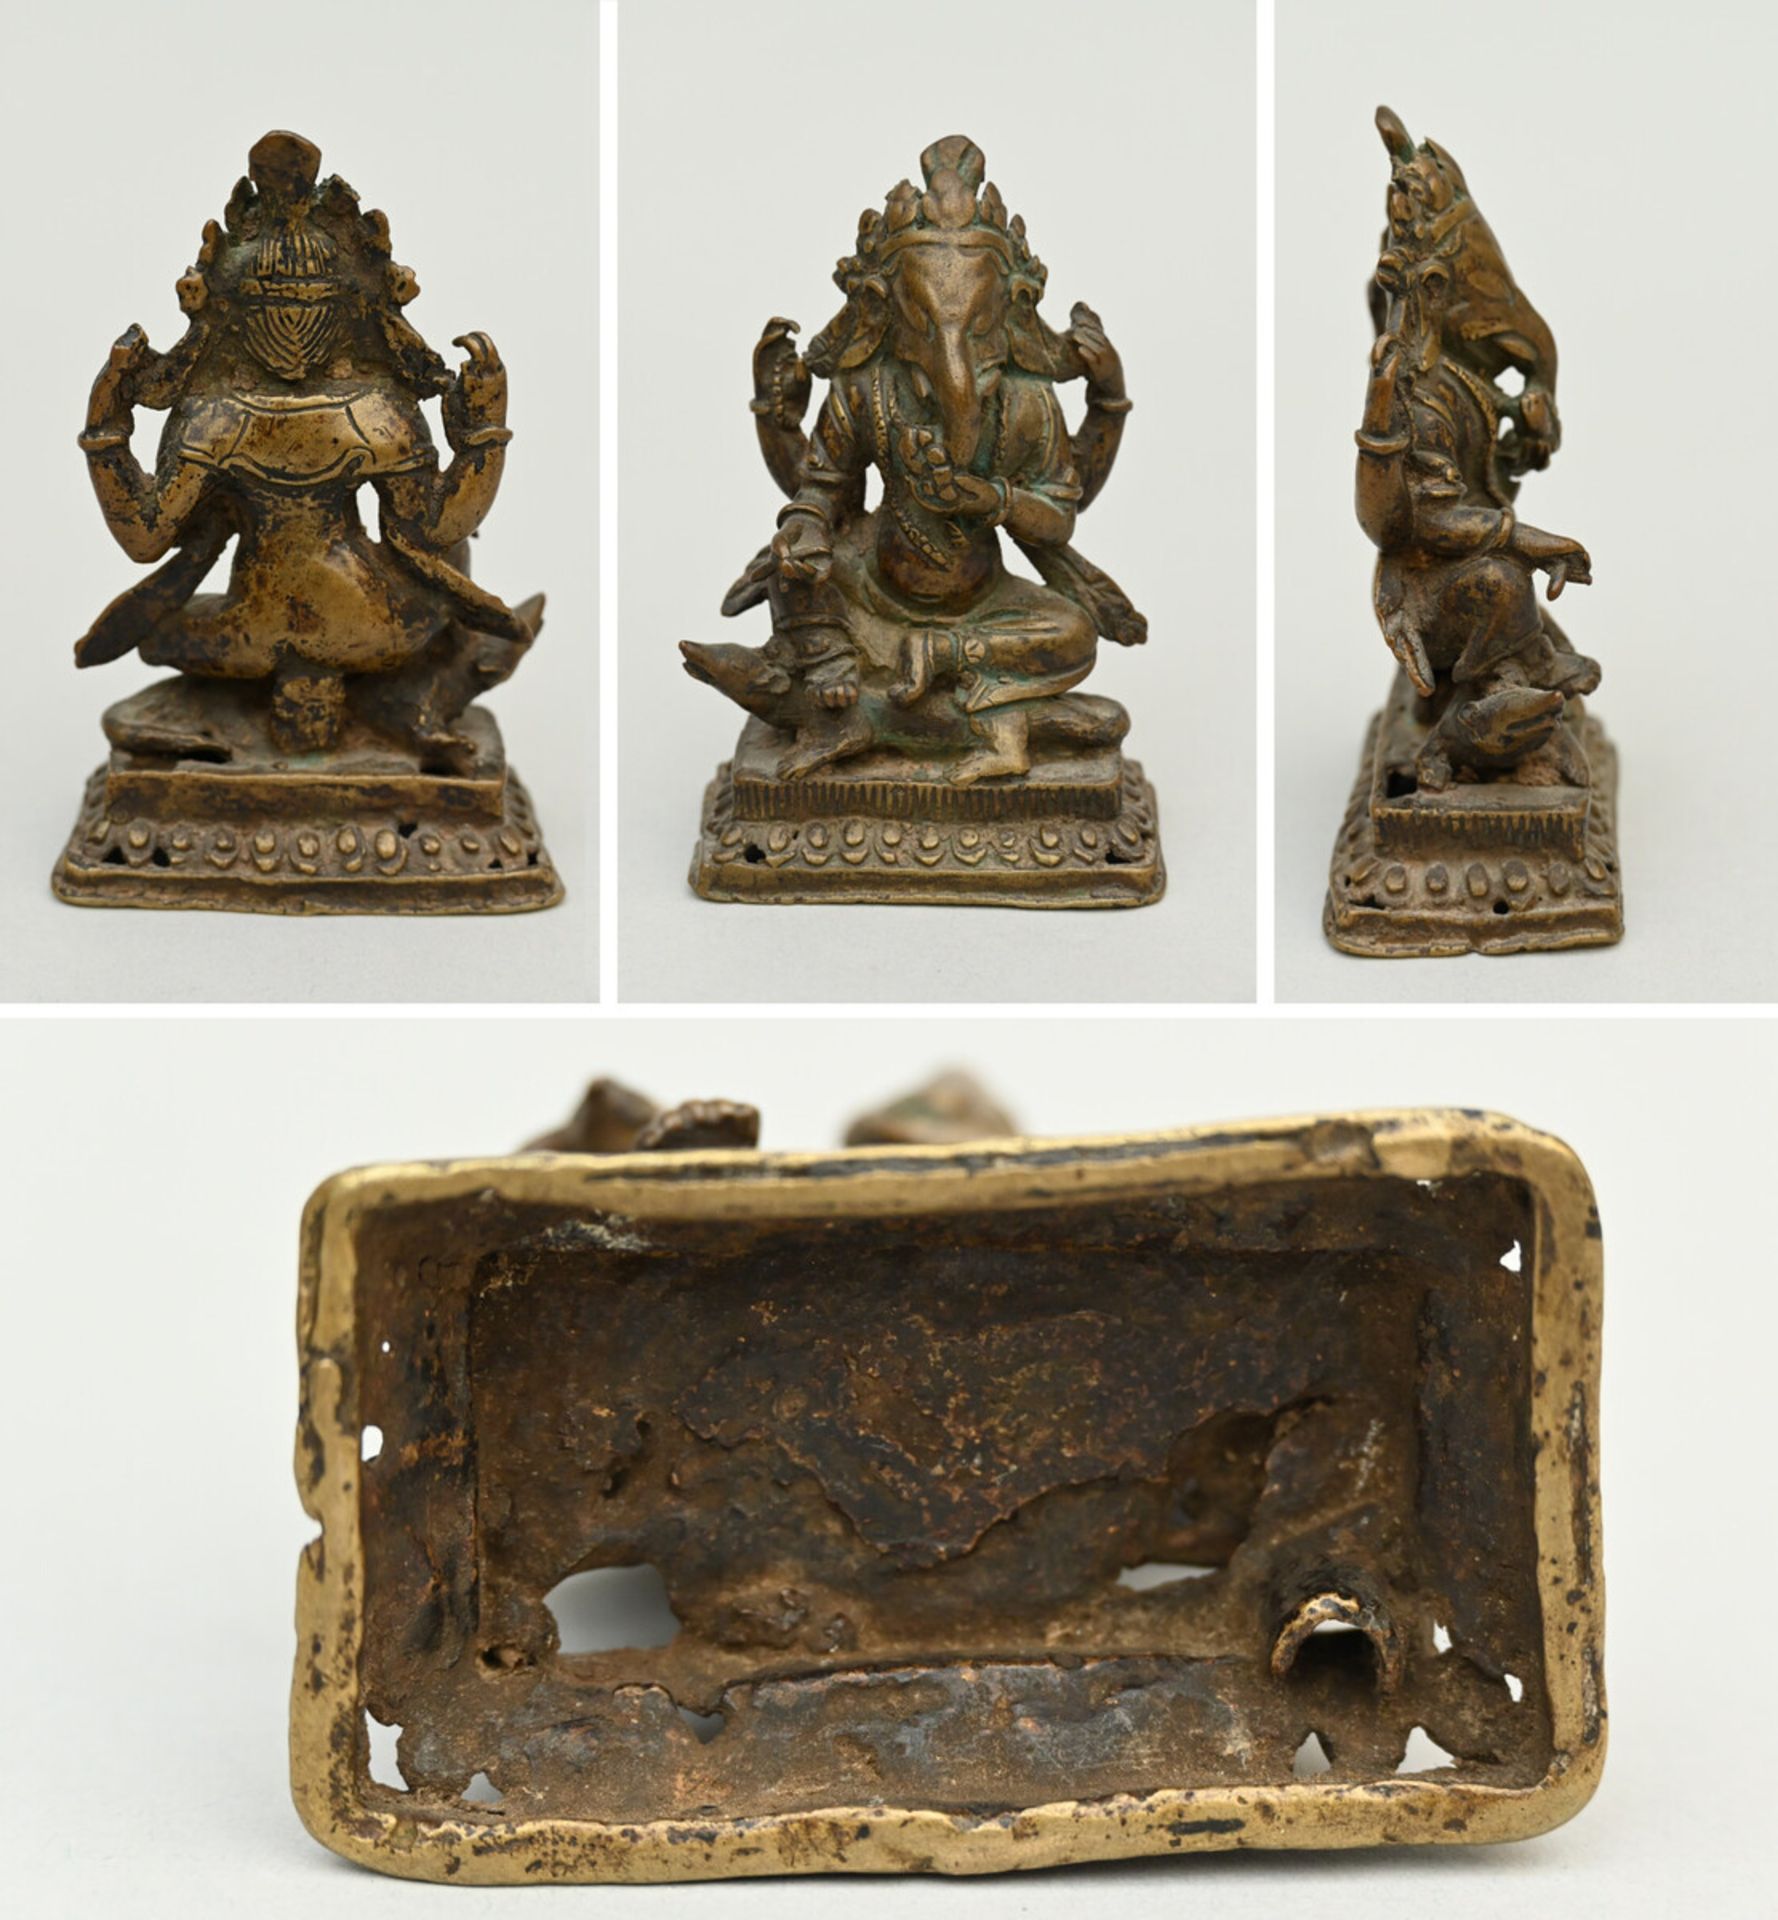 Collection of 3 bronze statues from Nepal and India: Ganesha (11.5cm) Durga (9.5cm) Durga (h10cm) - Image 4 of 4